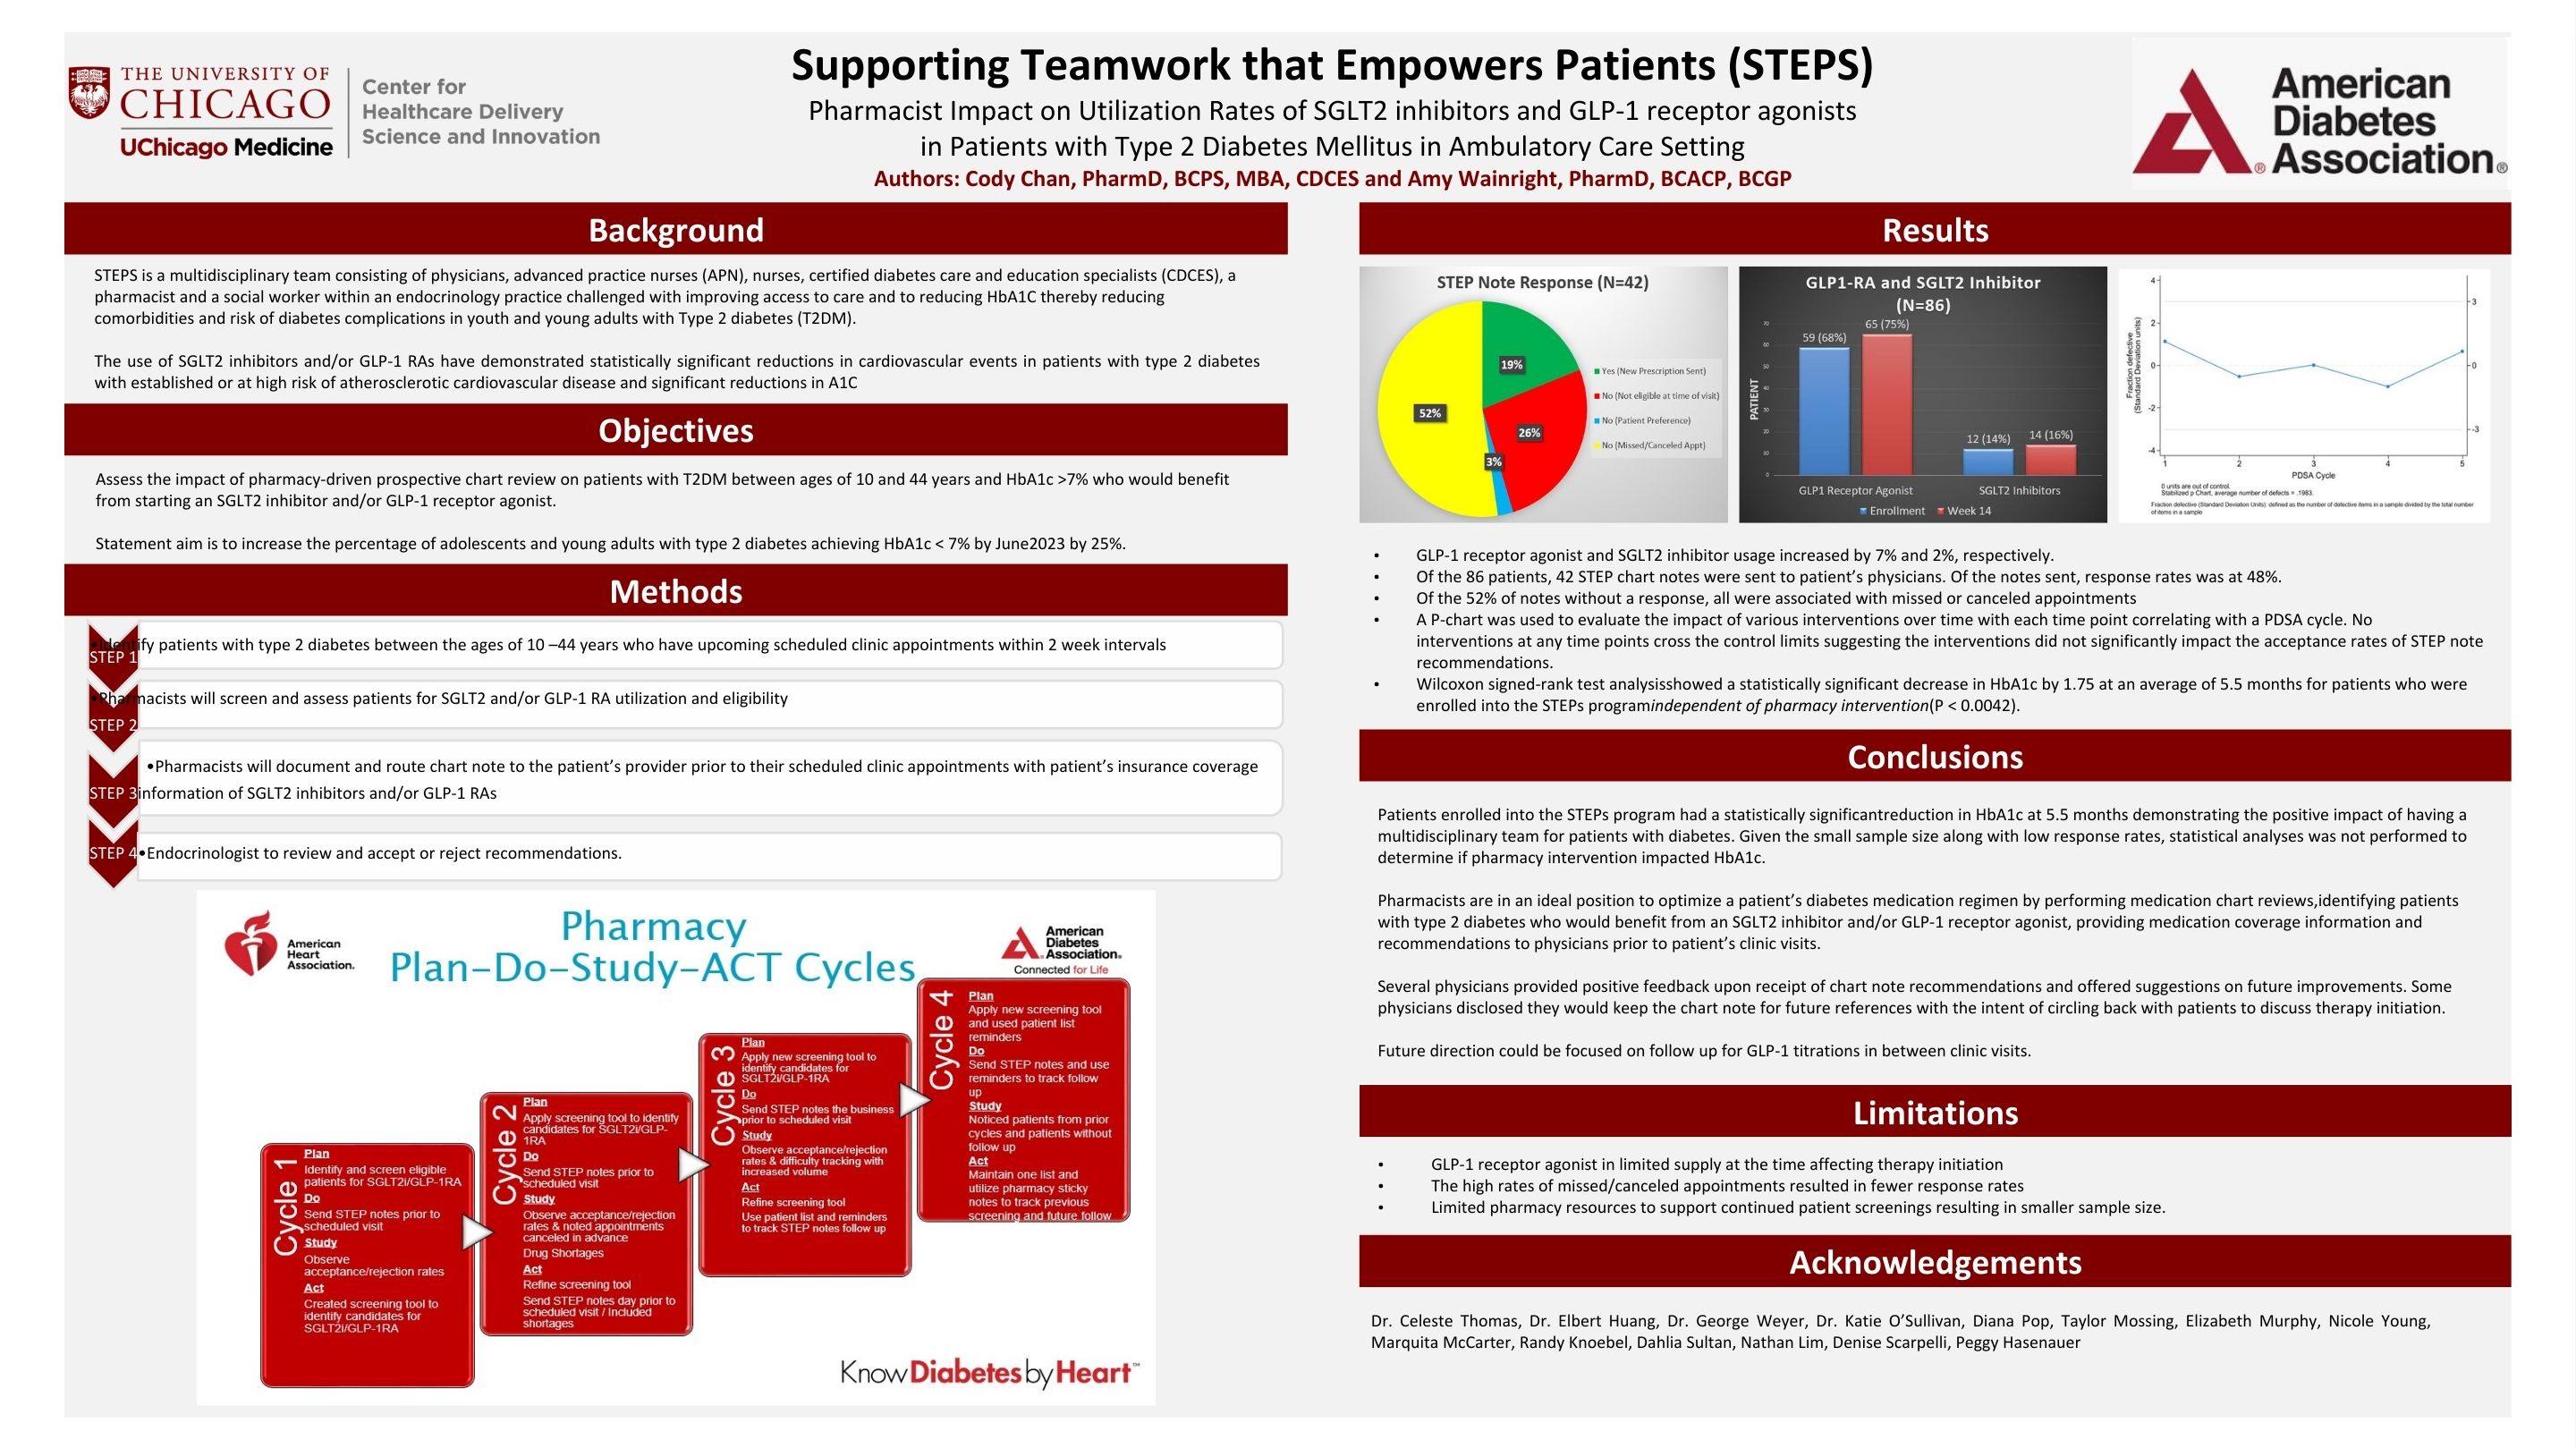 CHAN WAINRIGHT_STEPS Pharmacist Impact on Utilization Rates of SGLT2 inhibitors and GLP-1 receptor agonists in Ambulatory Care Setting.pdf (1)